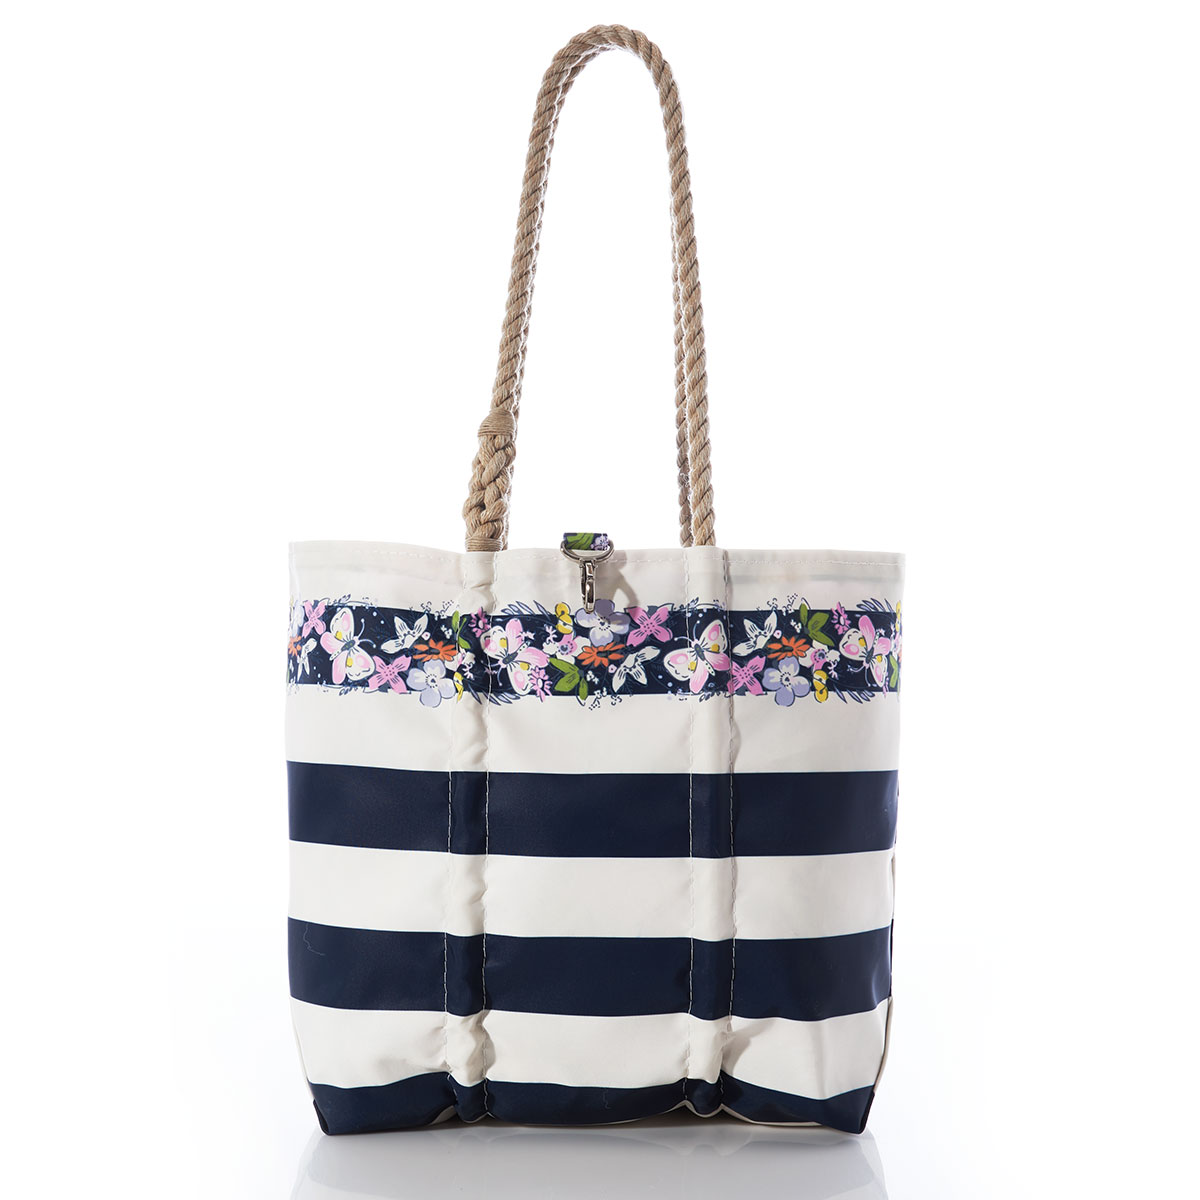 bold navy and white striped recycled sail cloth medium tote with hemp rope handles and top clasp embellished with flowers around the top